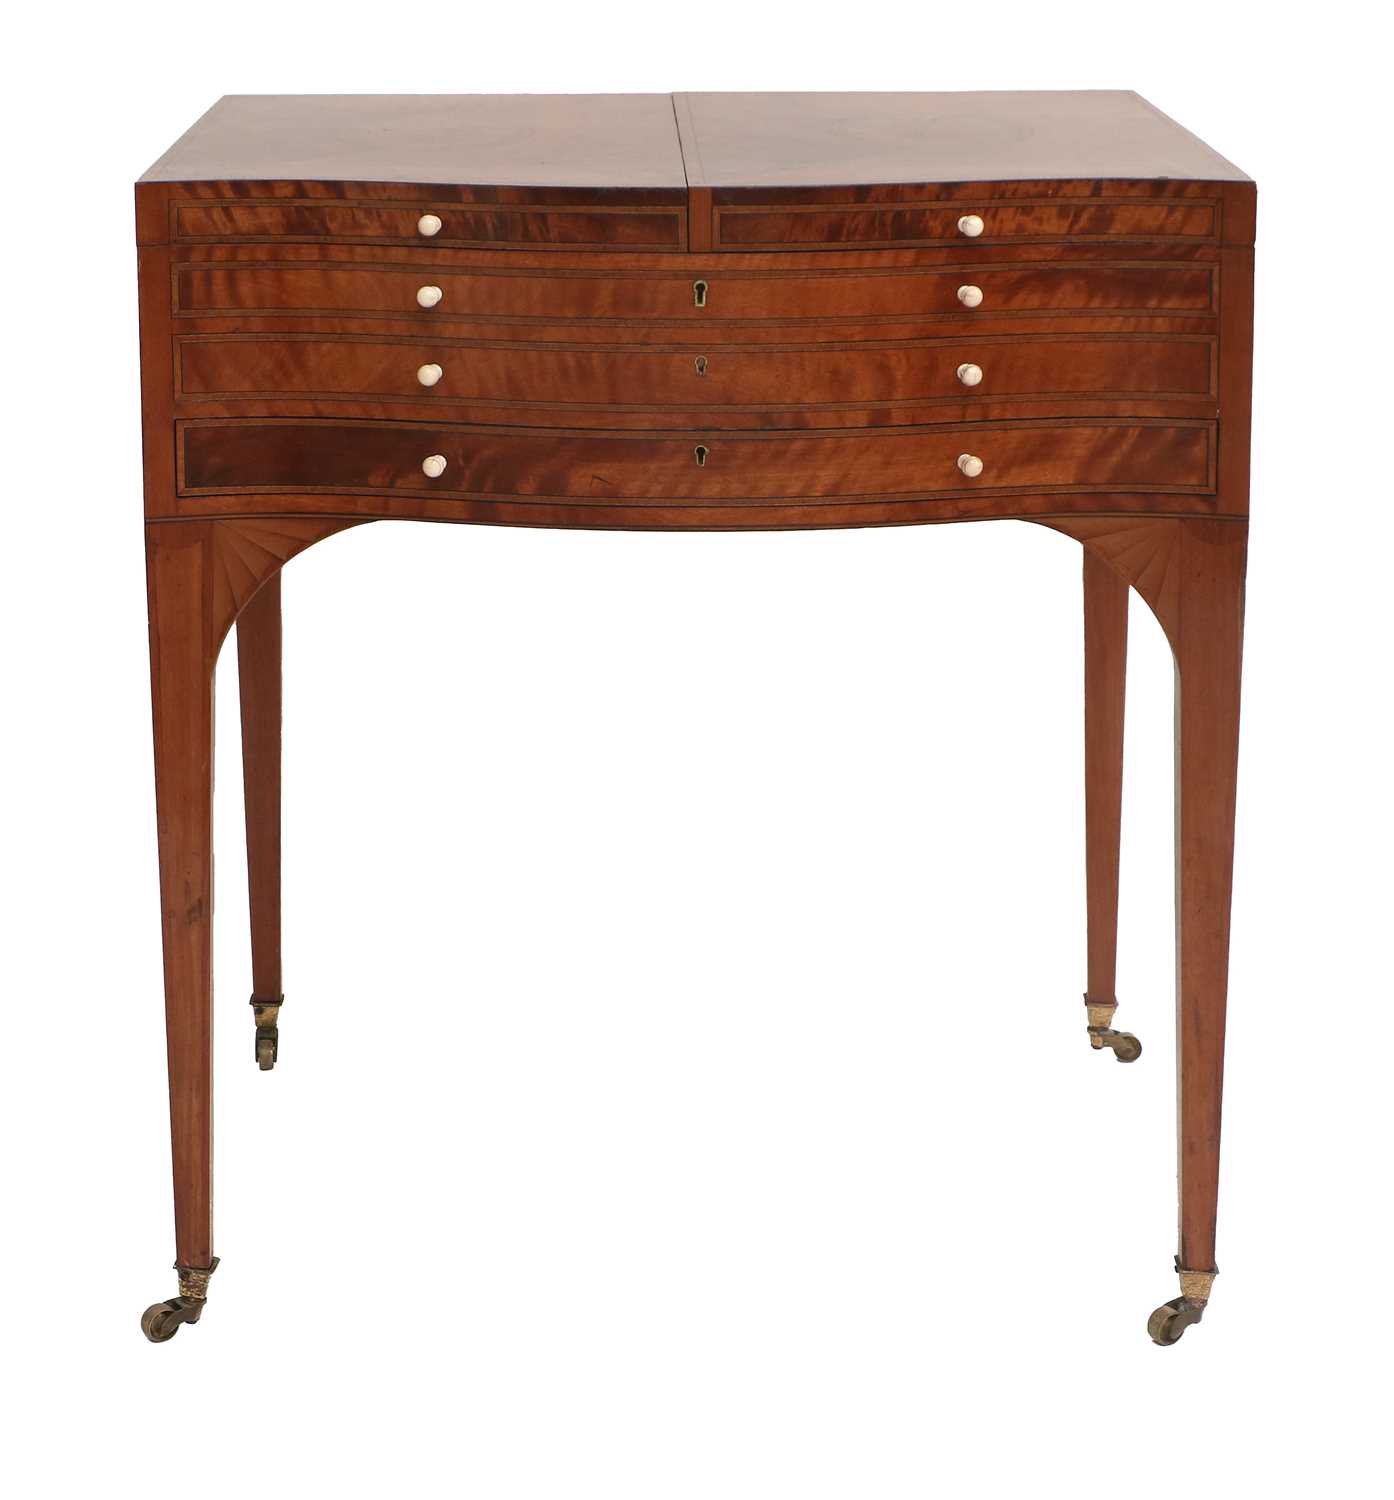 A George III Satinwood, Tulipwood-Banded and Marquetry-Inlaid Serpentine Dressing Table, early